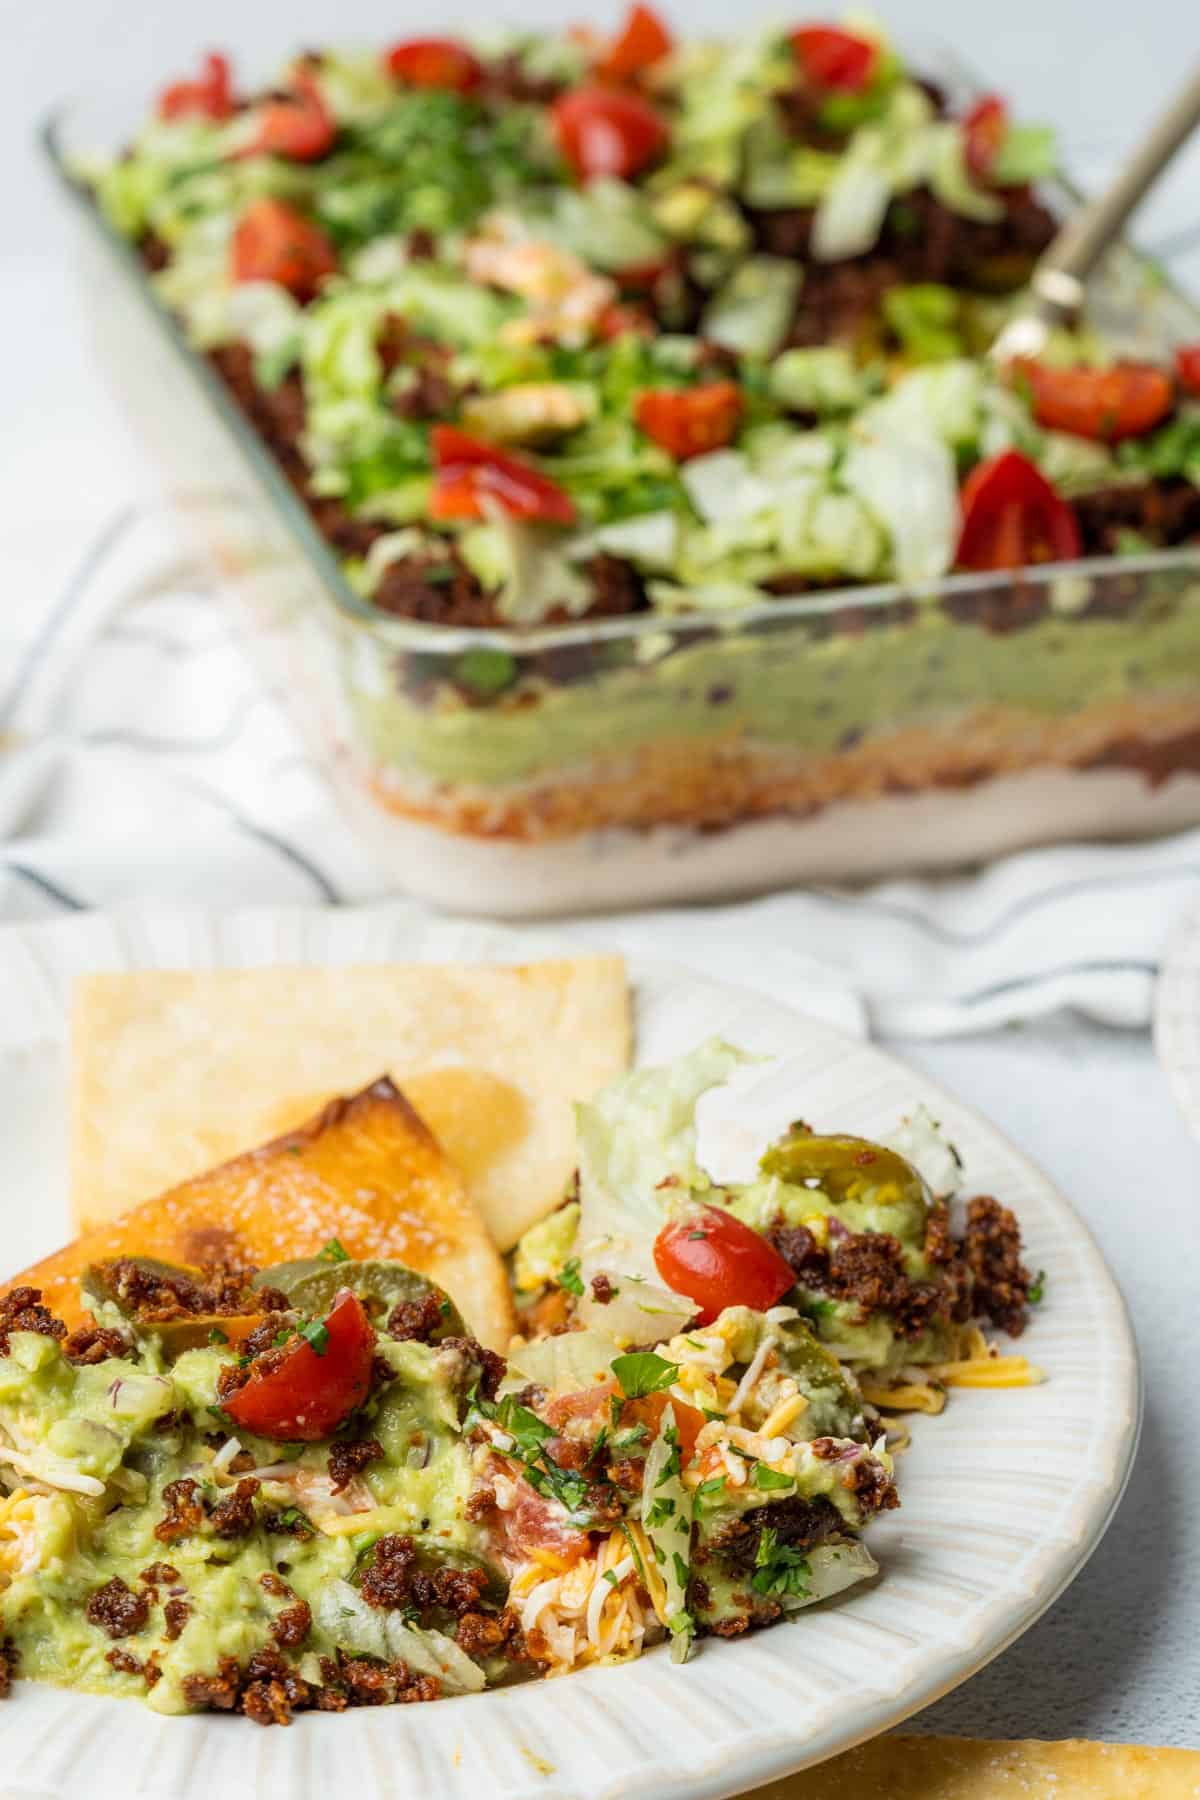 keto 7 layer dip in a glass casserole dish with a plate of dip and low carb tortilla chips in the foreground